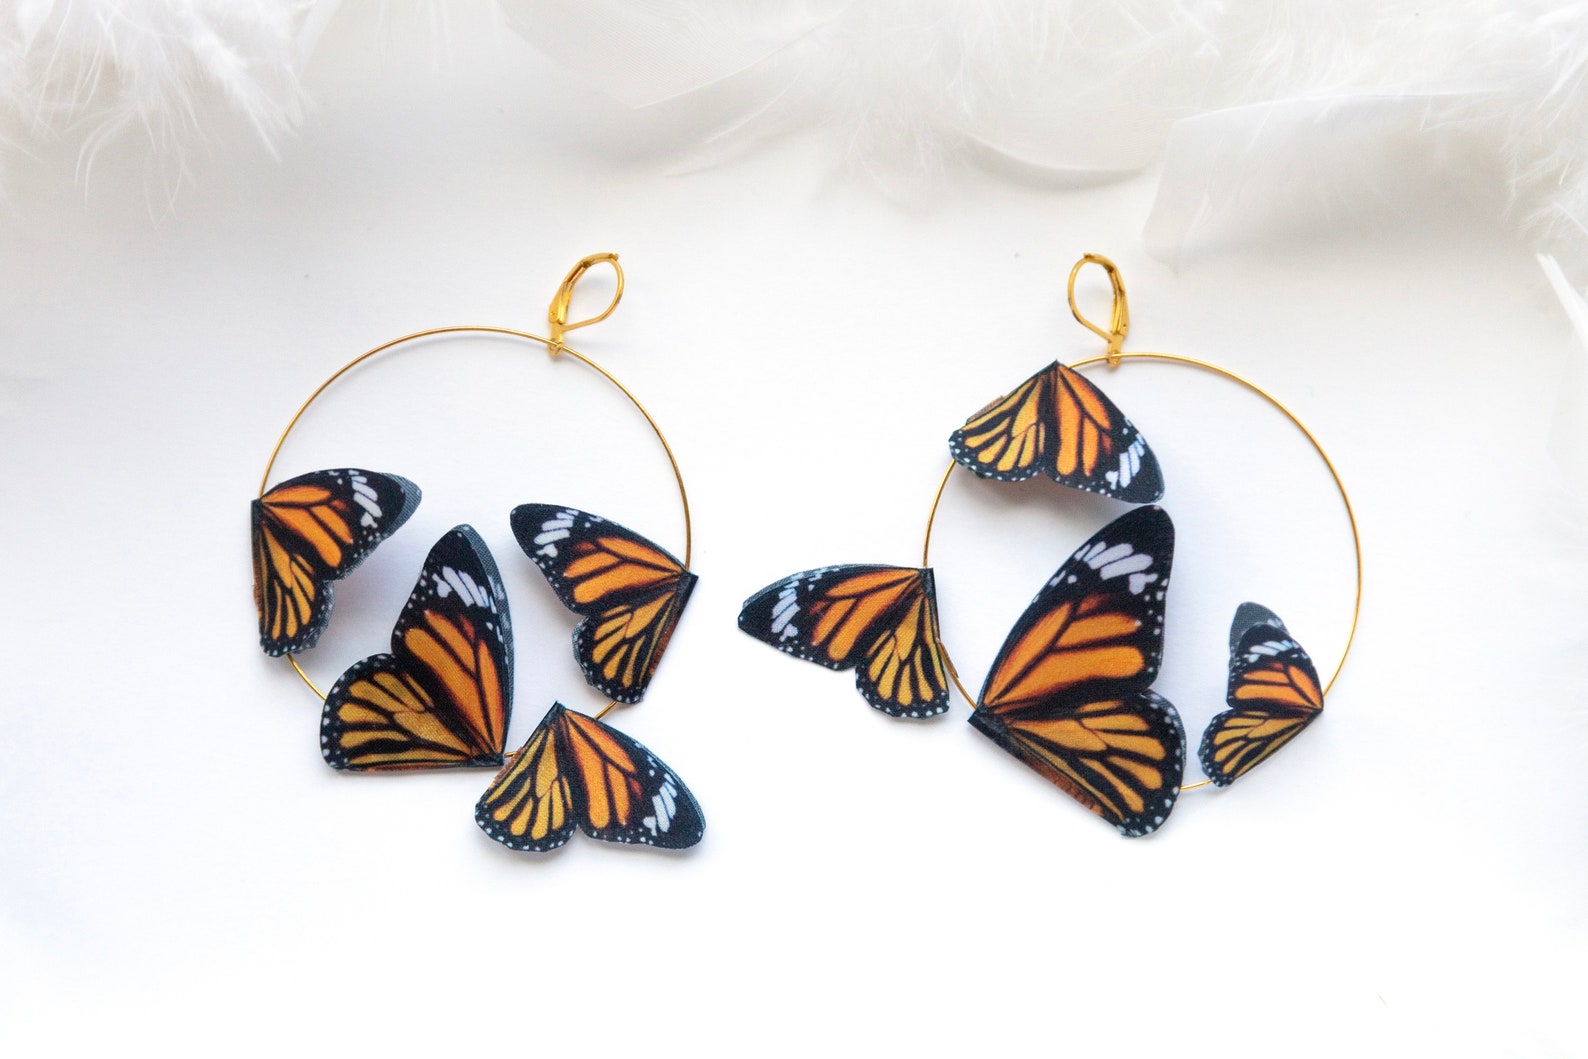 Gold hoop earrings with delicate monarch butterfly charms